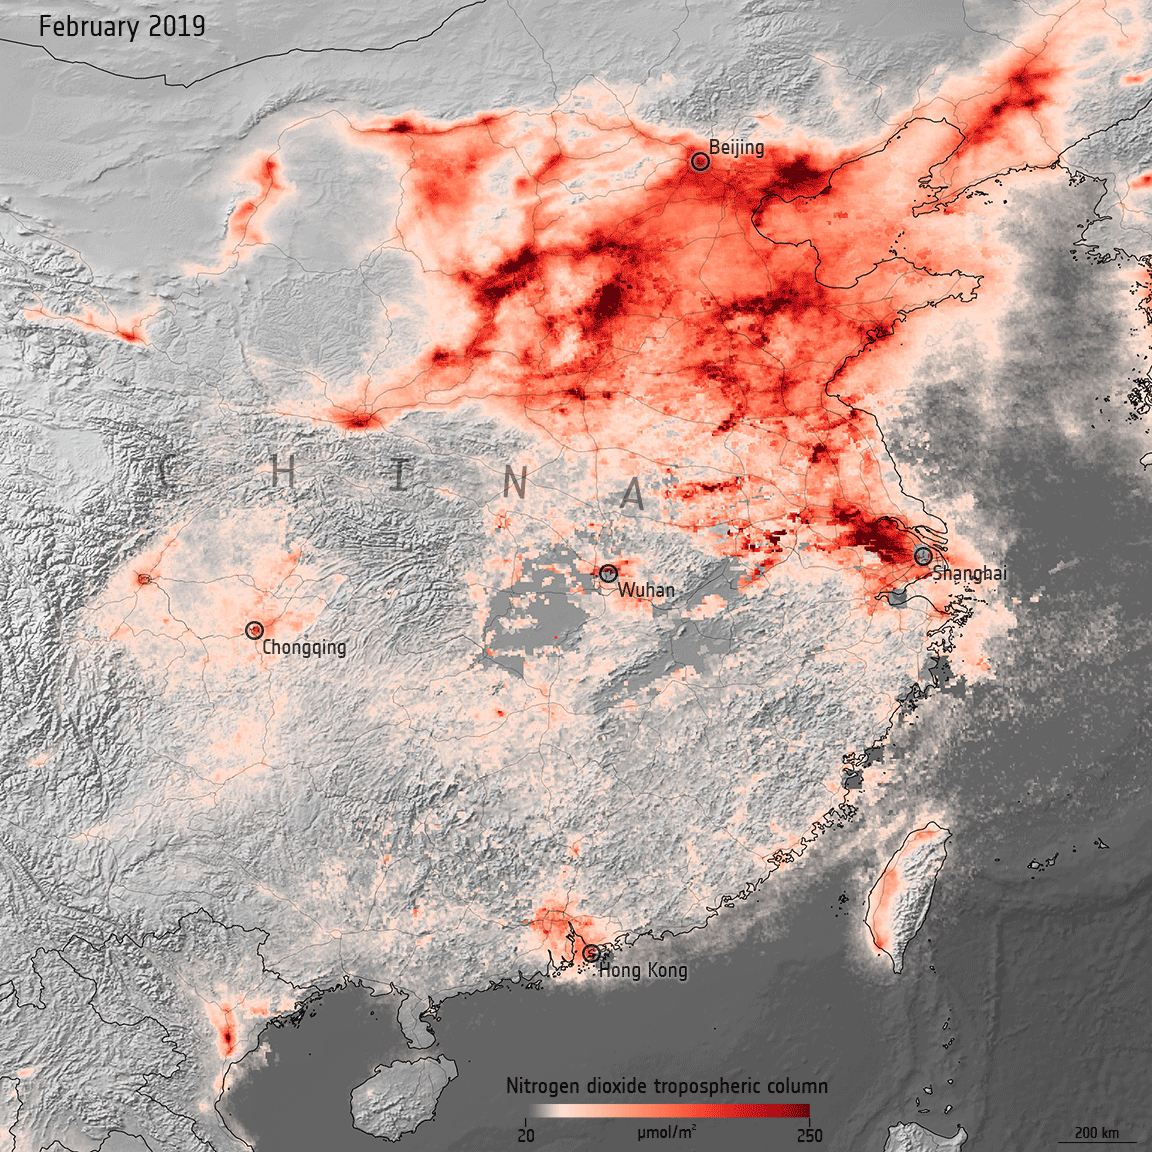 Figure 36: This animation uses data from the Copernicus Sentinel-5P satellite to show the monthly average nitrogen dioxide concentrations over China in February 2019, February 2020 and February 2021. In early 2020, data from satellites were used to show a decline in air pollution over China coinciding with nationwide lockdowns put in place to stop the spread of COVID-19. One year later, nitrogen dioxide levels in China have risen back to pre-COVID levels according to new data from the Copernicus Sentinel-5P satellite (image credit: ESA, the image contains modified Copernicus Sentinel data (2019-21), processed by ESA, CC BY-SA 3.0 IGO)